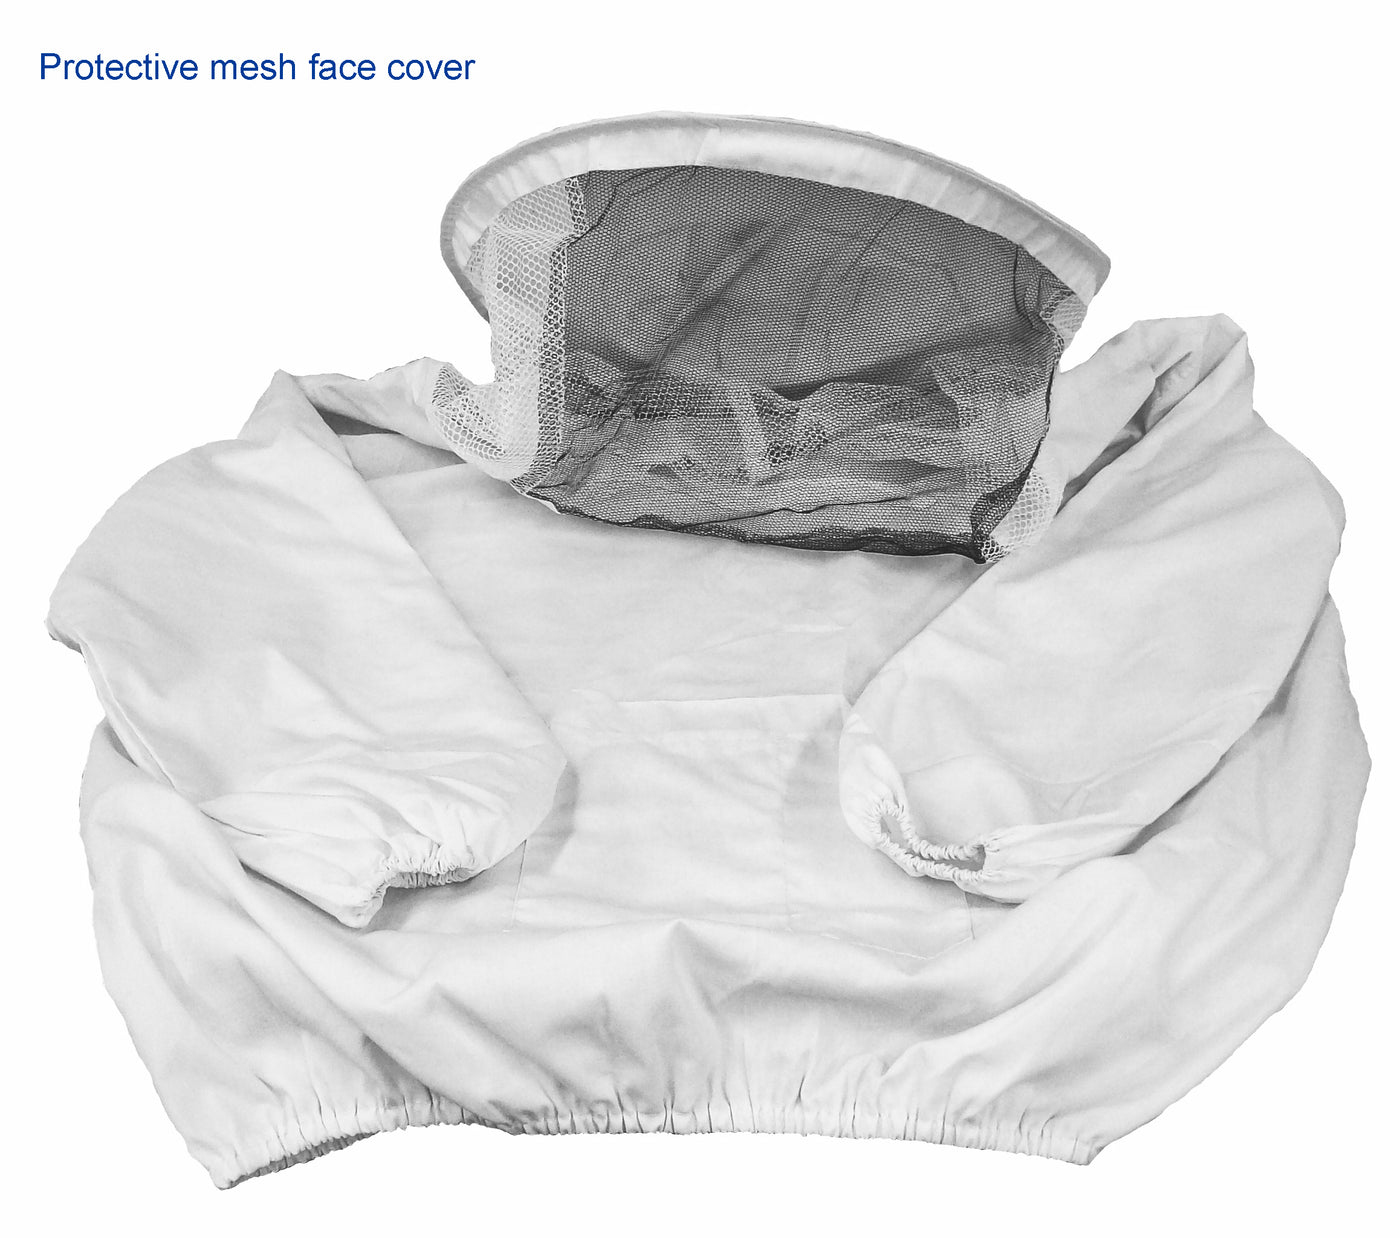 Youth Large Beekeeping Jacket with Protective Mesh Face Cover